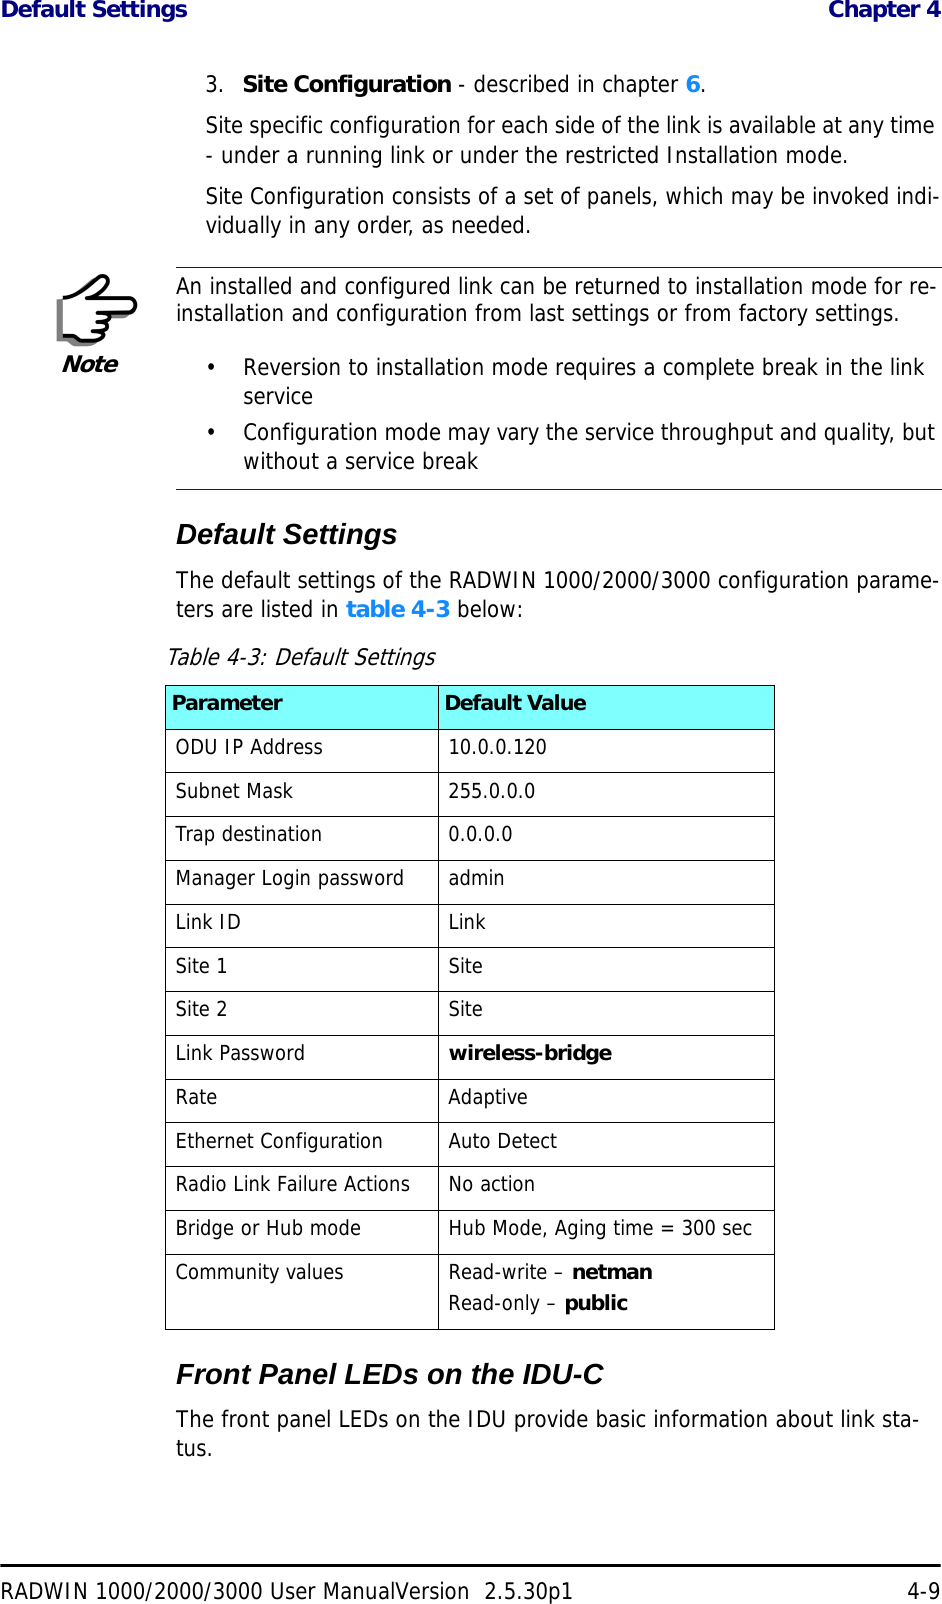 Default Settings  Chapter 4RADWIN 1000/2000/3000 User ManualVersion  2.5.30p1 4-93.  Site Configuration - described in chapter 6.Site specific configuration for each side of the link is available at any time - under a running link or under the restricted Installation mode.Site Configuration consists of a set of panels, which may be invoked indi-vidually in any order, as needed.Default SettingsThe default settings of the RADWIN 1000/2000/3000 configuration parame-ters are listed in table 4-3 below:Front Panel LEDs on the IDU-CThe front panel LEDs on the IDU provide basic information about link sta-tus. NoteAn installed and configured link can be returned to installation mode for re-installation and configuration from last settings or from factory settings.• Reversion to installation mode requires a complete break in the link service• Configuration mode may vary the service throughput and quality, but without a service breakTable 4-3: Default SettingsParameter Default ValueODU IP Address 10.0.0.120Subnet Mask 255.0.0.0Trap destination 0.0.0.0Manager Login password adminLink ID Link Site 1 SiteSite 2 SiteLink Password wireless-bridgeRate AdaptiveEthernet Configuration Auto DetectRadio Link Failure Actions No actionBridge or Hub mode Hub Mode, Aging time = 300 secCommunity values Read-write – netmanRead-only – public